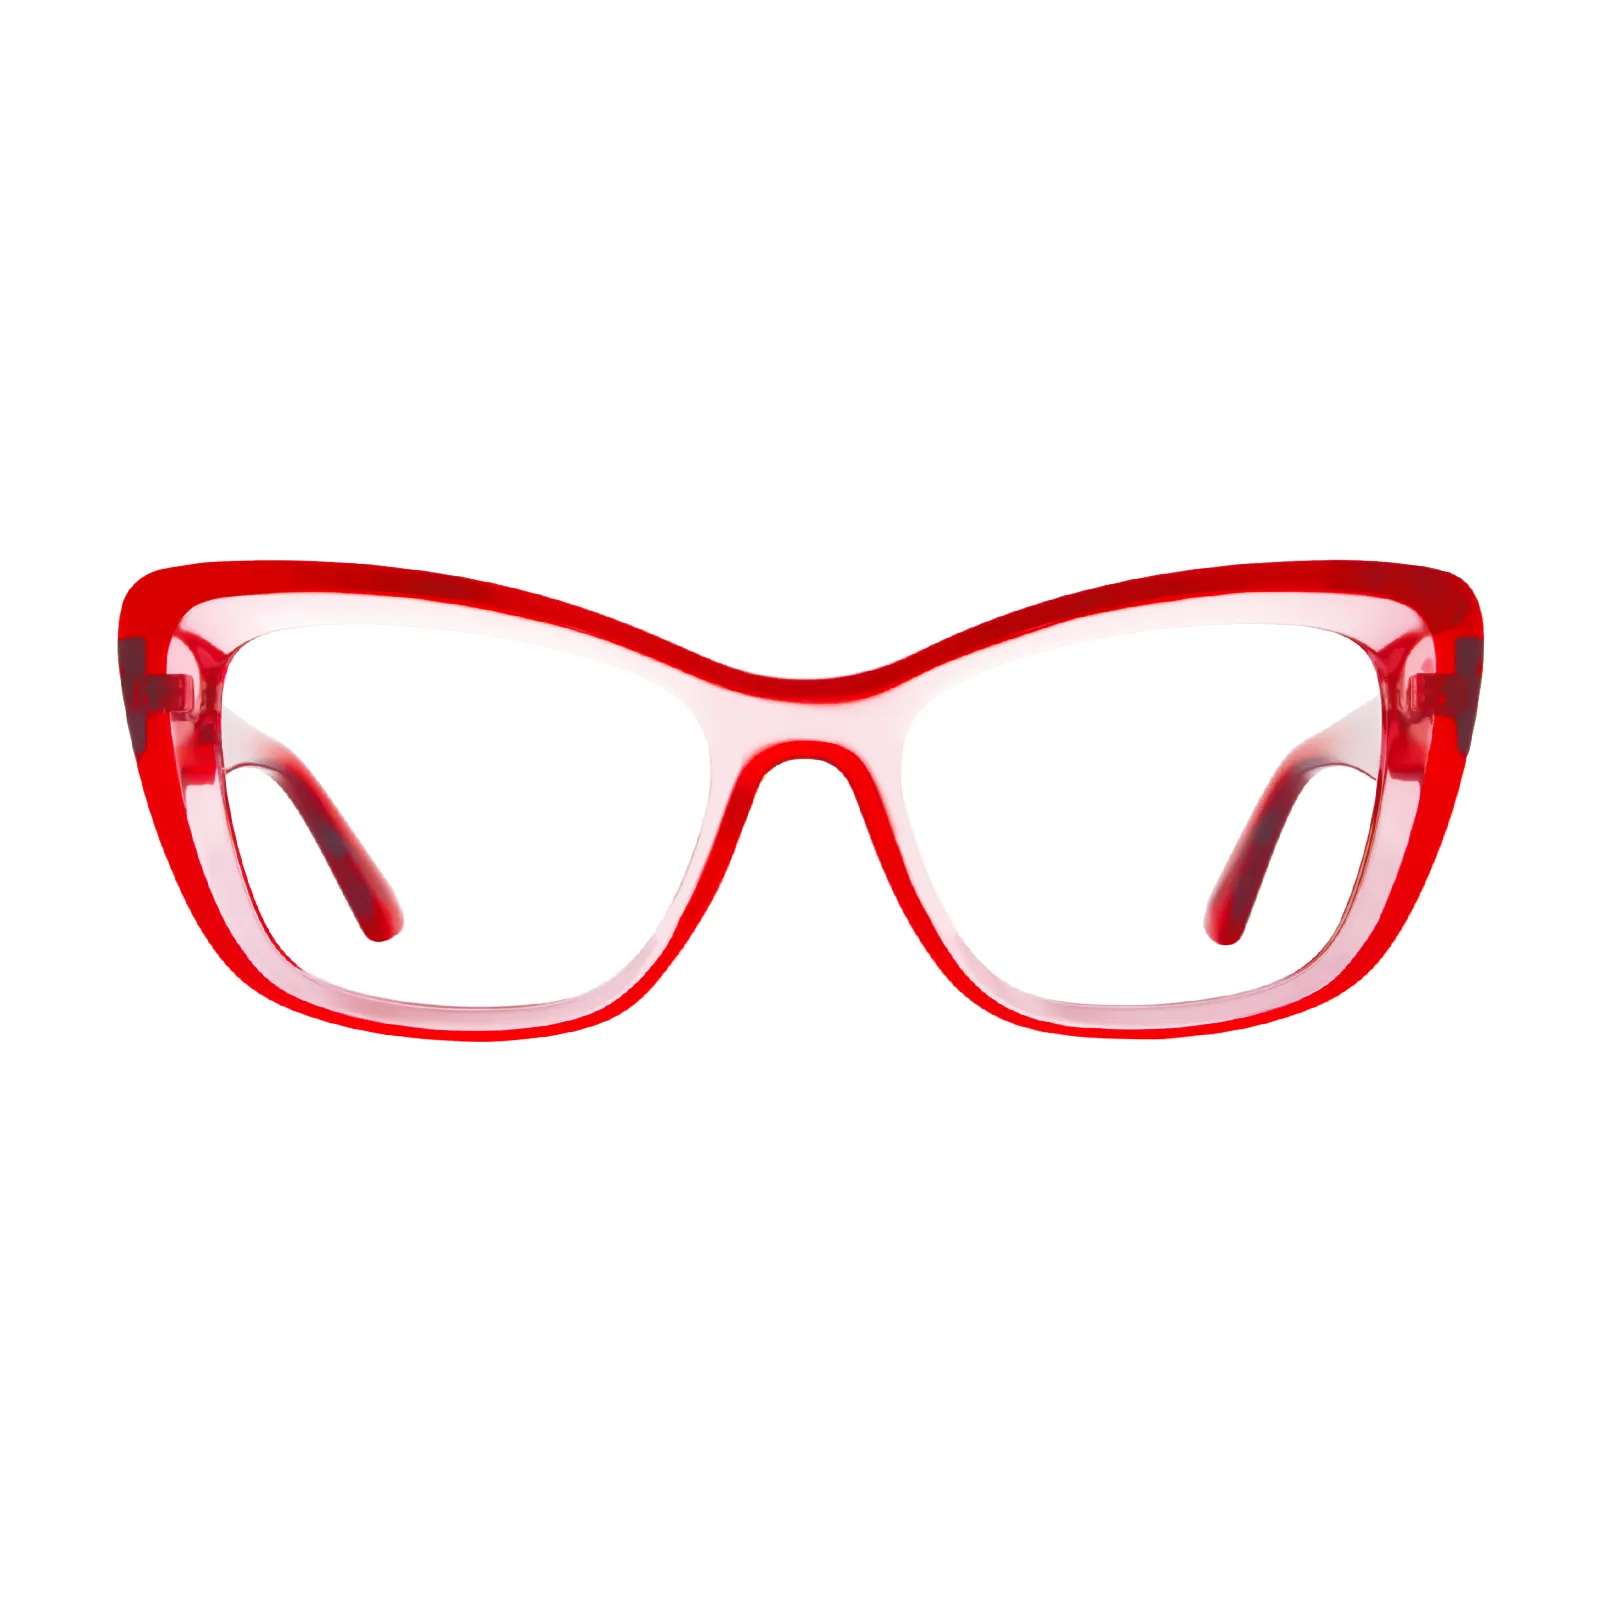 Buena - Cat-Eye Transparent-Red Glasses for Women